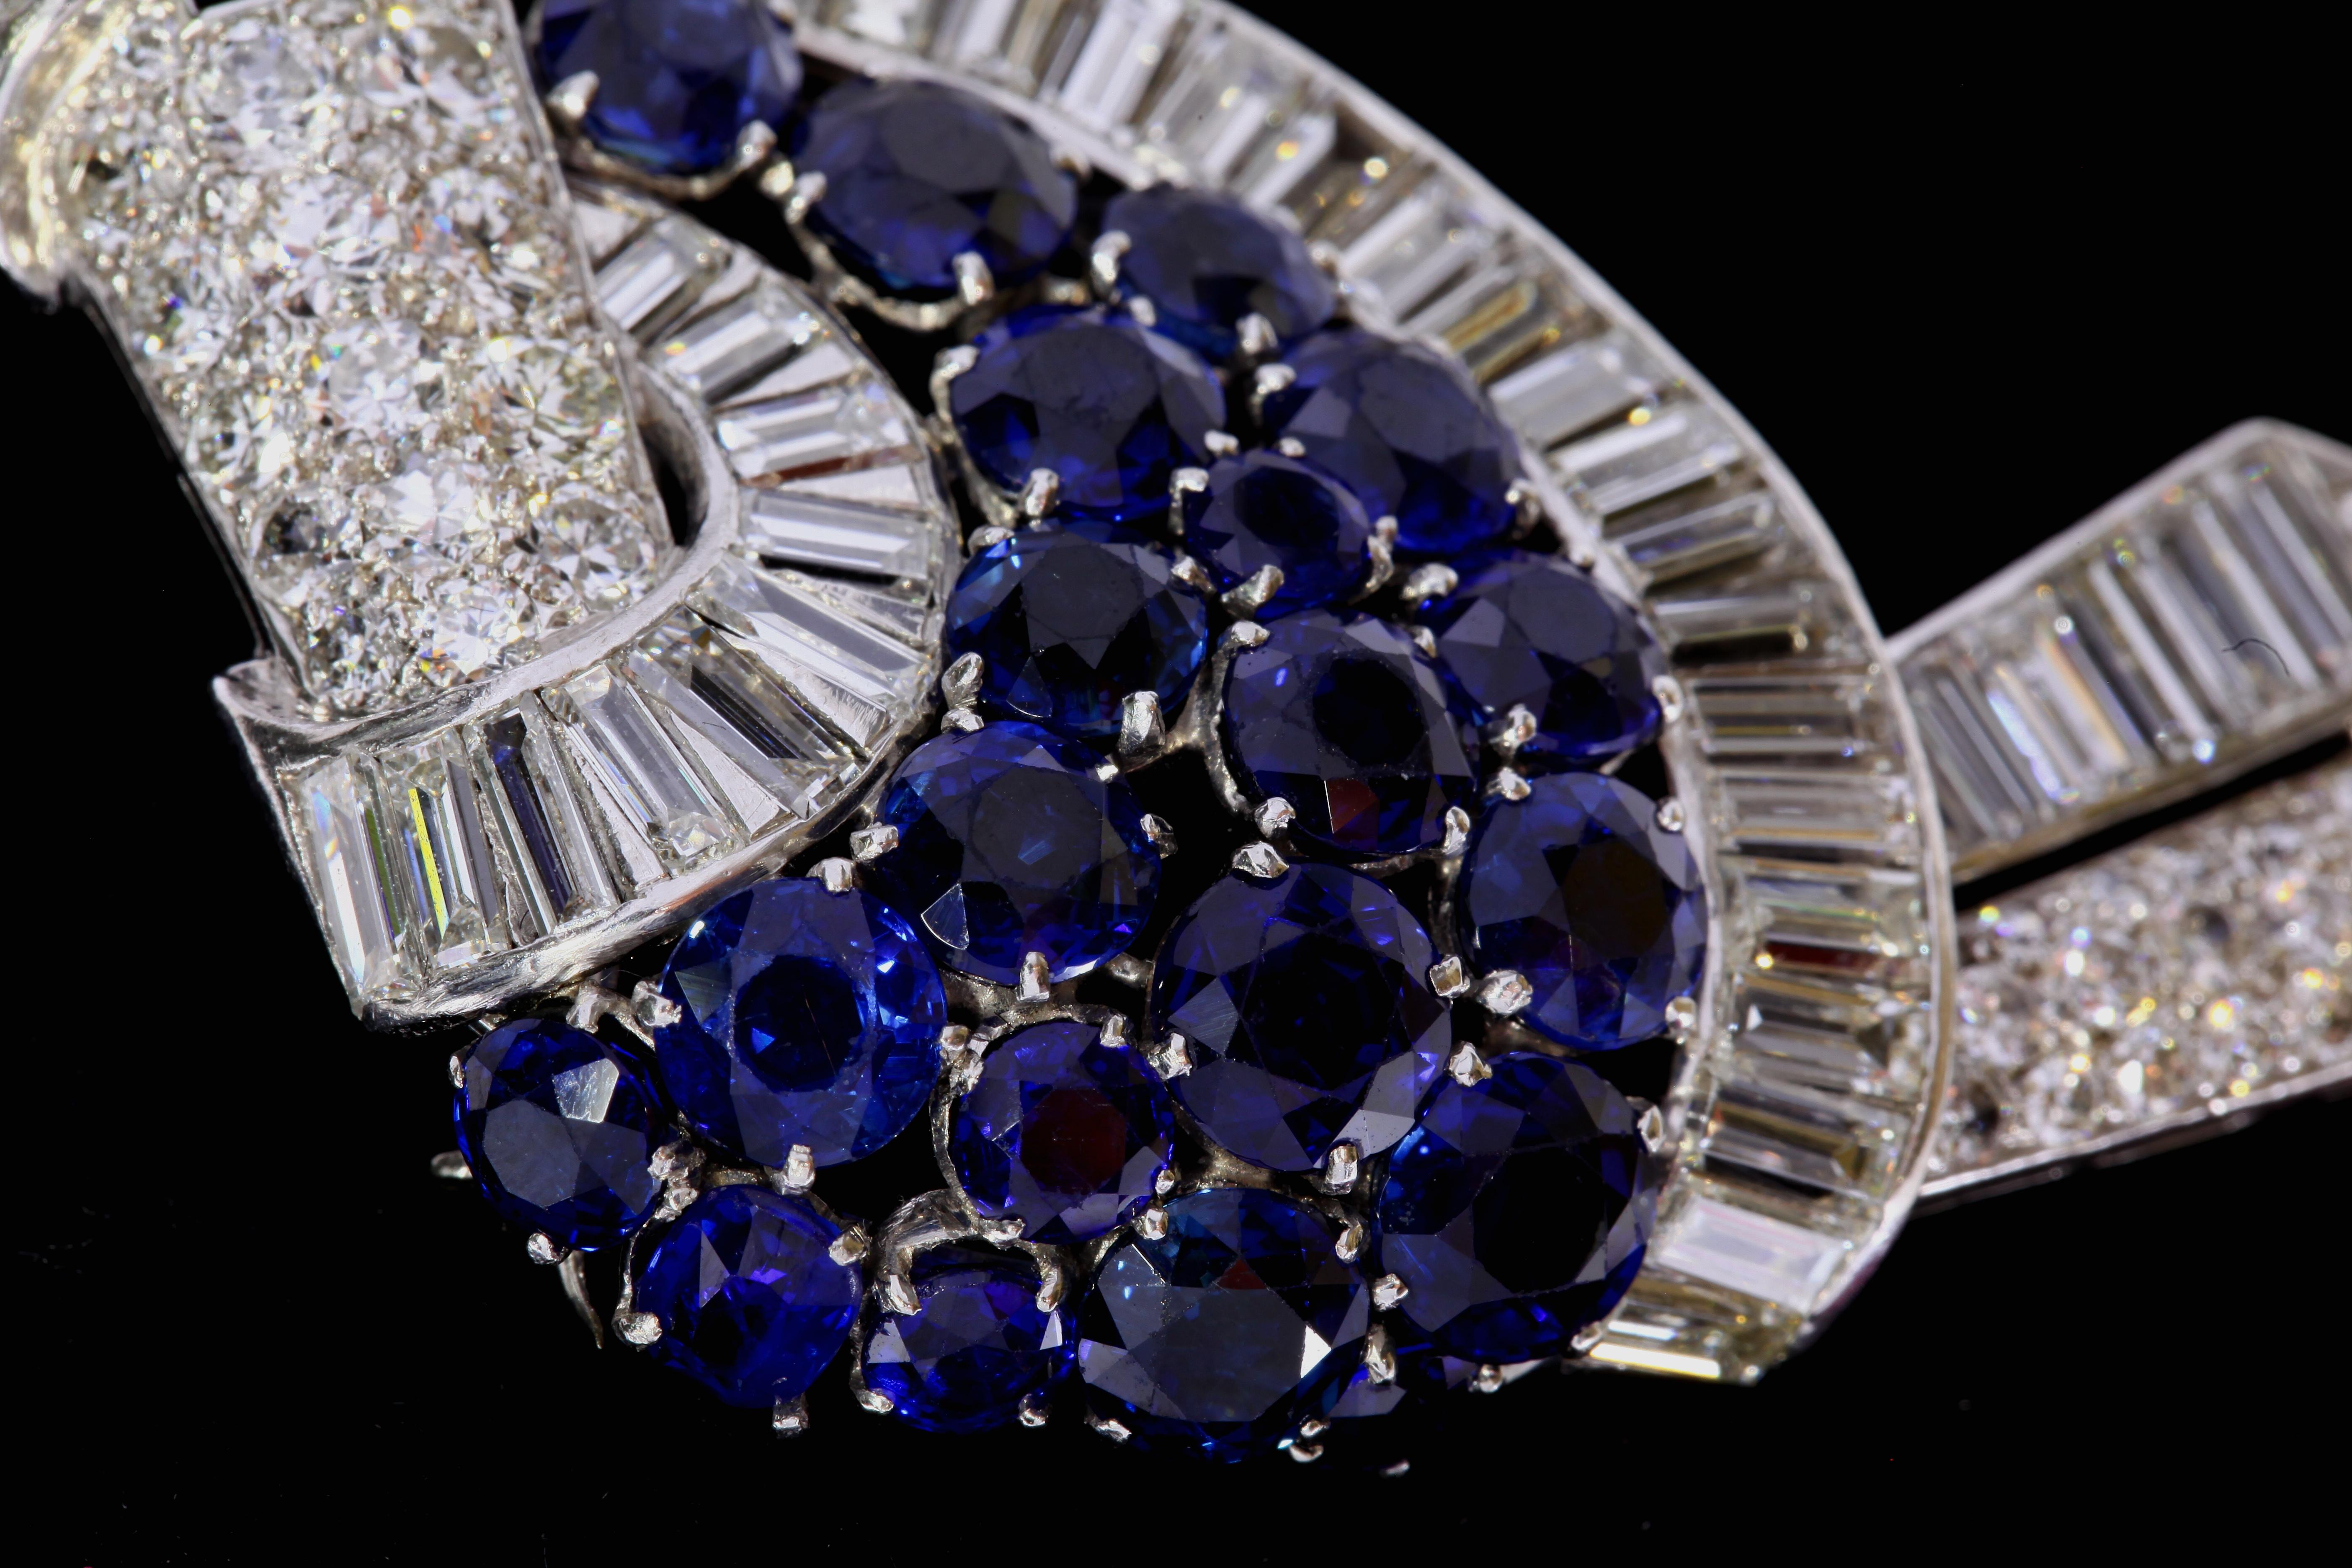 Art Deco Platinum Brooch with Diamonds and Sapphires from circa 1935 (Art déco) im Angebot